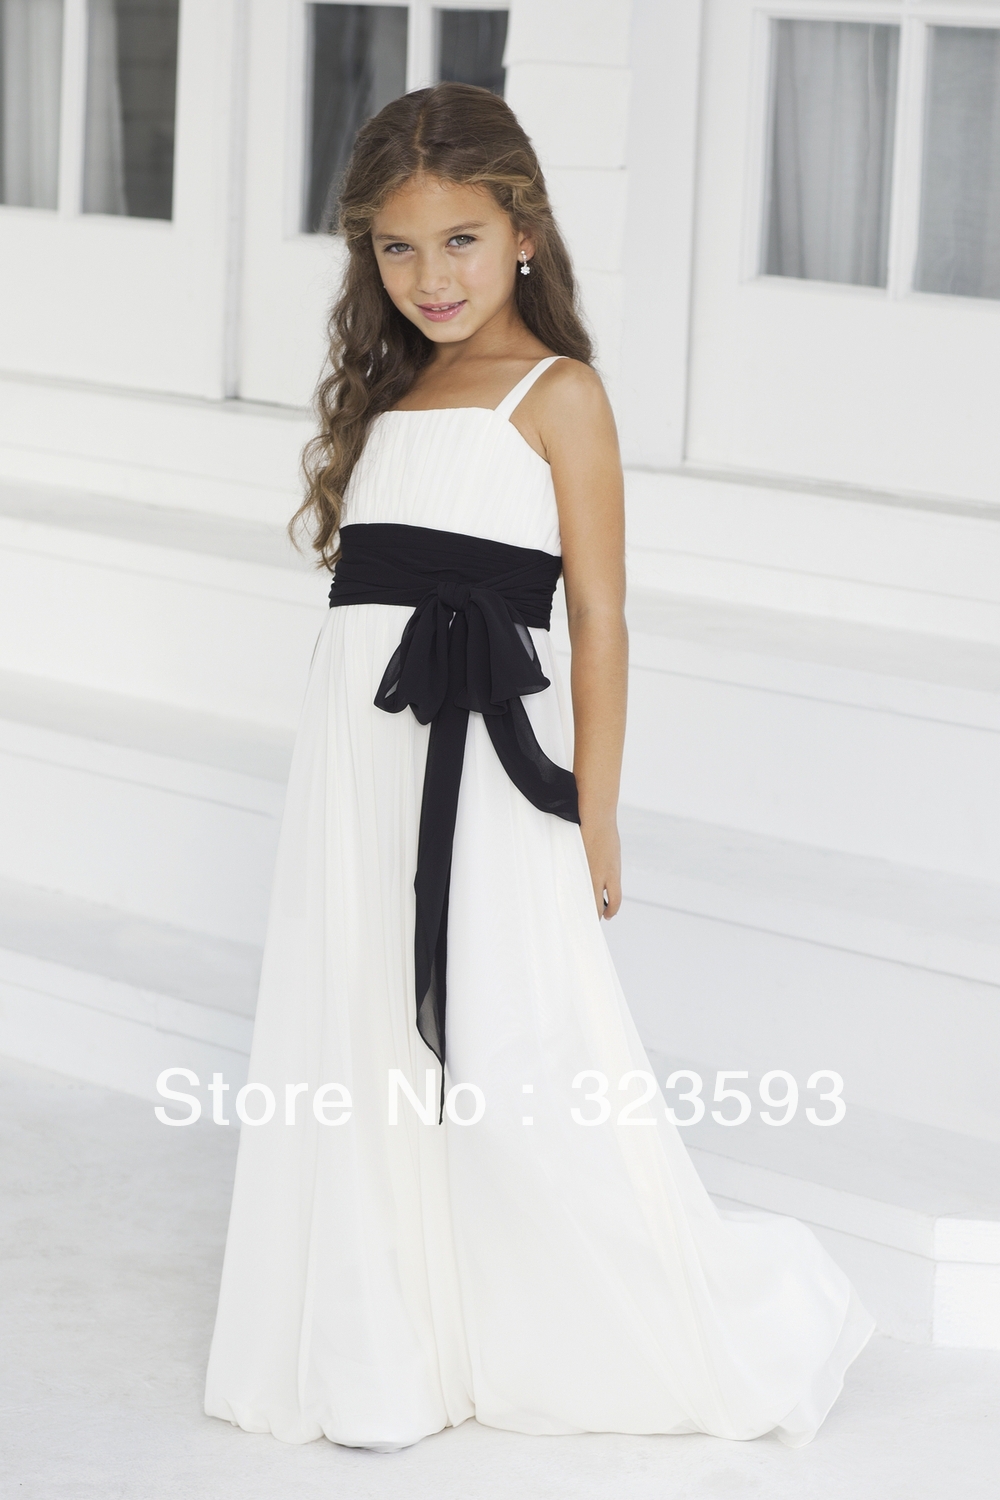 Free Shipping Cute Pleat Sashes Spaghetti Strap Floor Lenght Empire Chiffon Flower Girl Dresses 2013 Girls' Formal Occasion F042